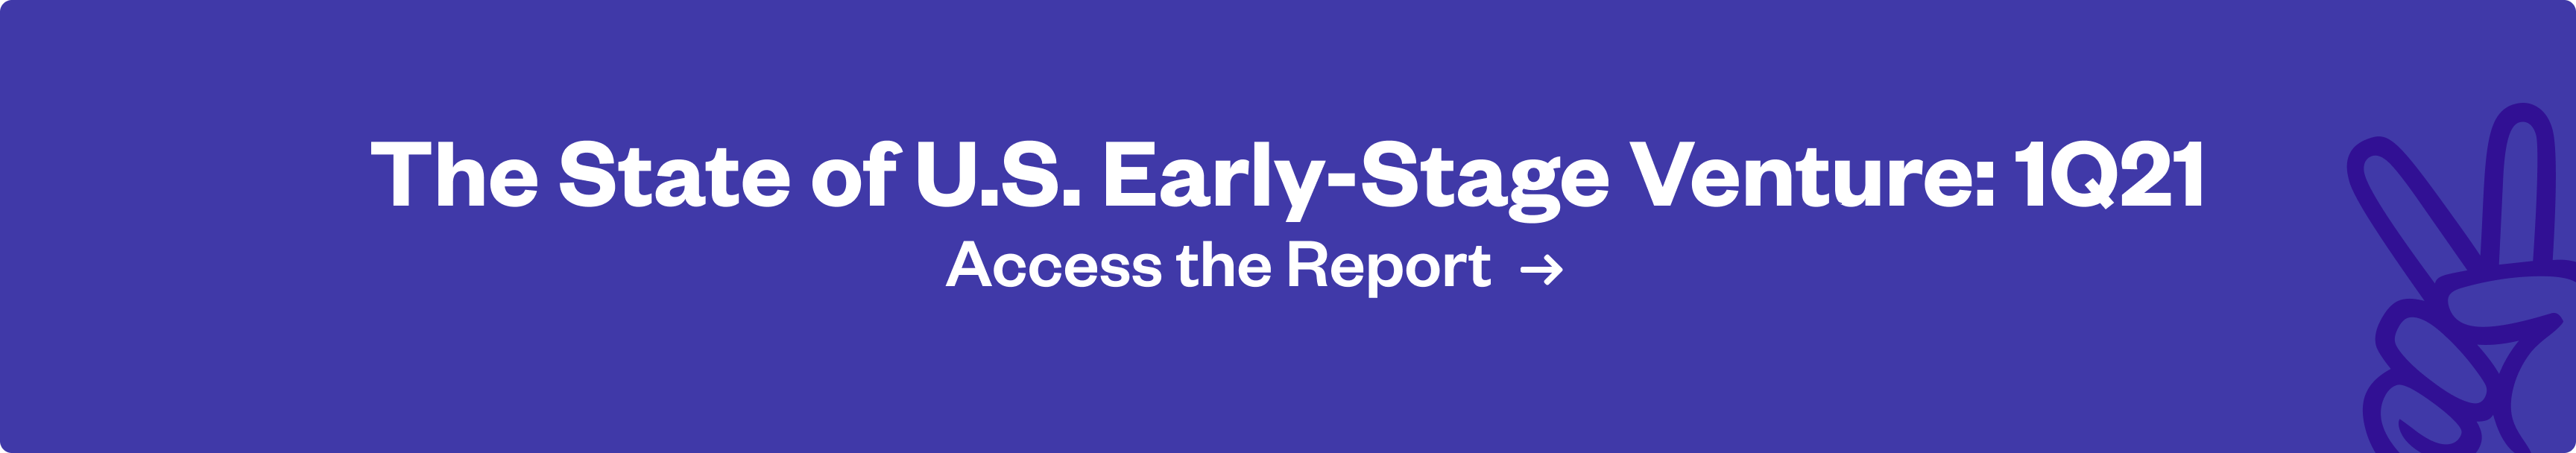 Read the State of u.s. early-Stage Venture: 1Q21